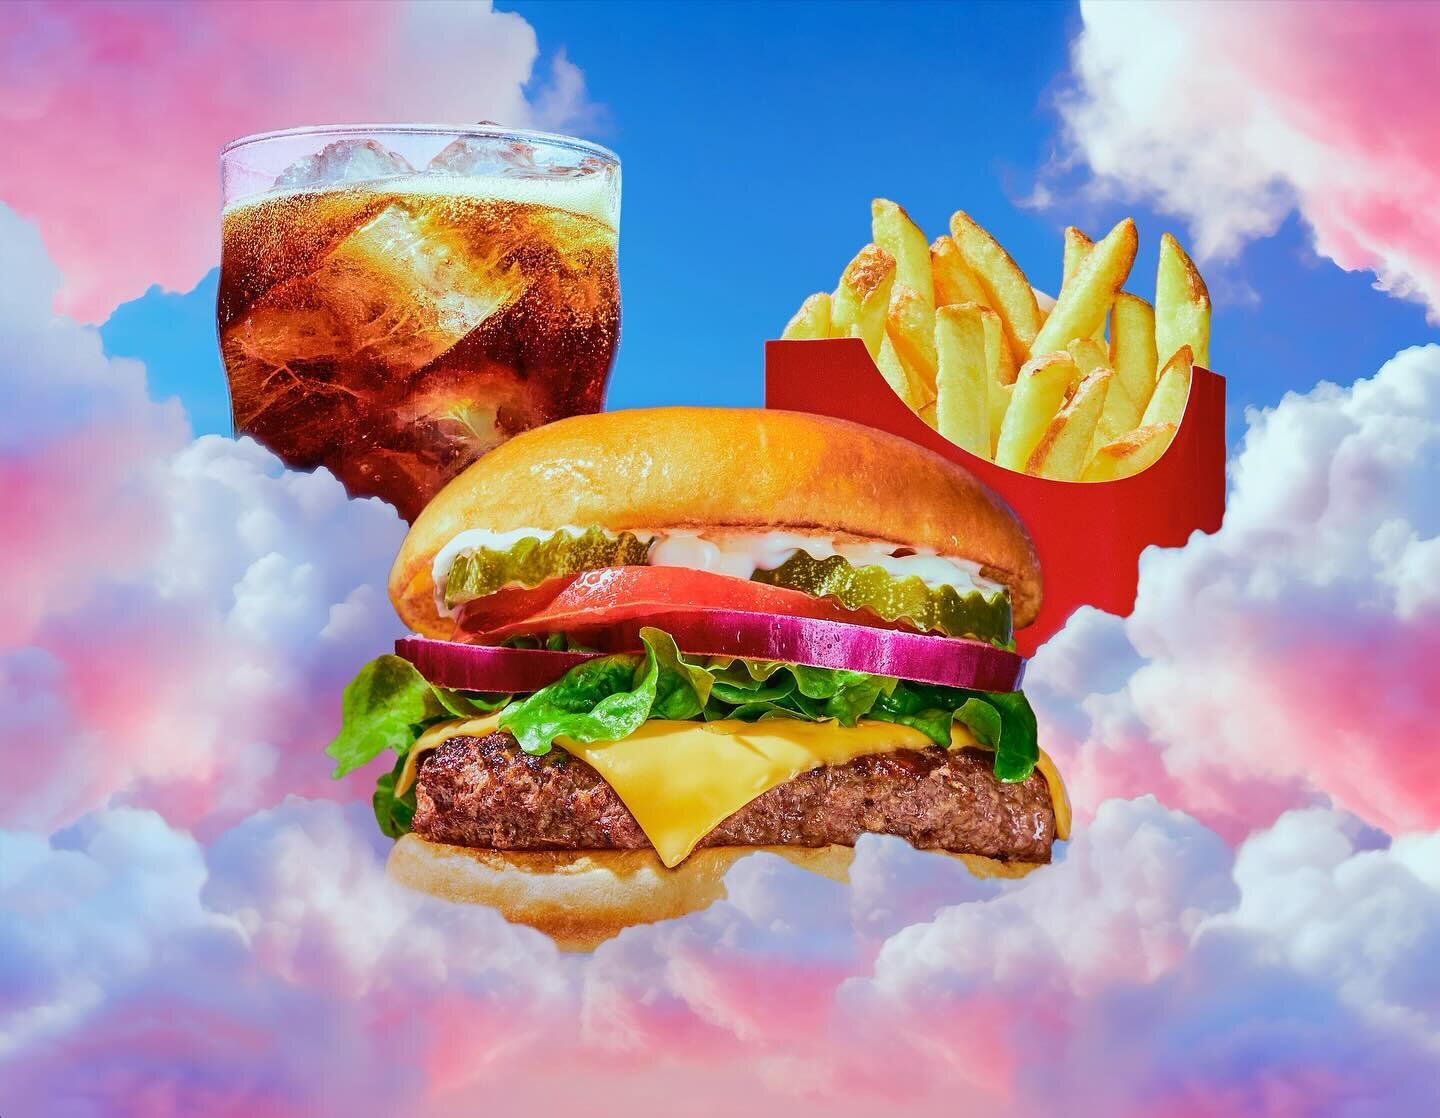 It&rsquo;s giving &ldquo;Burger Heaven&rdquo; ✨ 🍔 🍟 

fun lil celestial collab with @maddie.eickhoff 📸  who also created those dreamy AI clouds 
🍔 🍟 🥤 by me